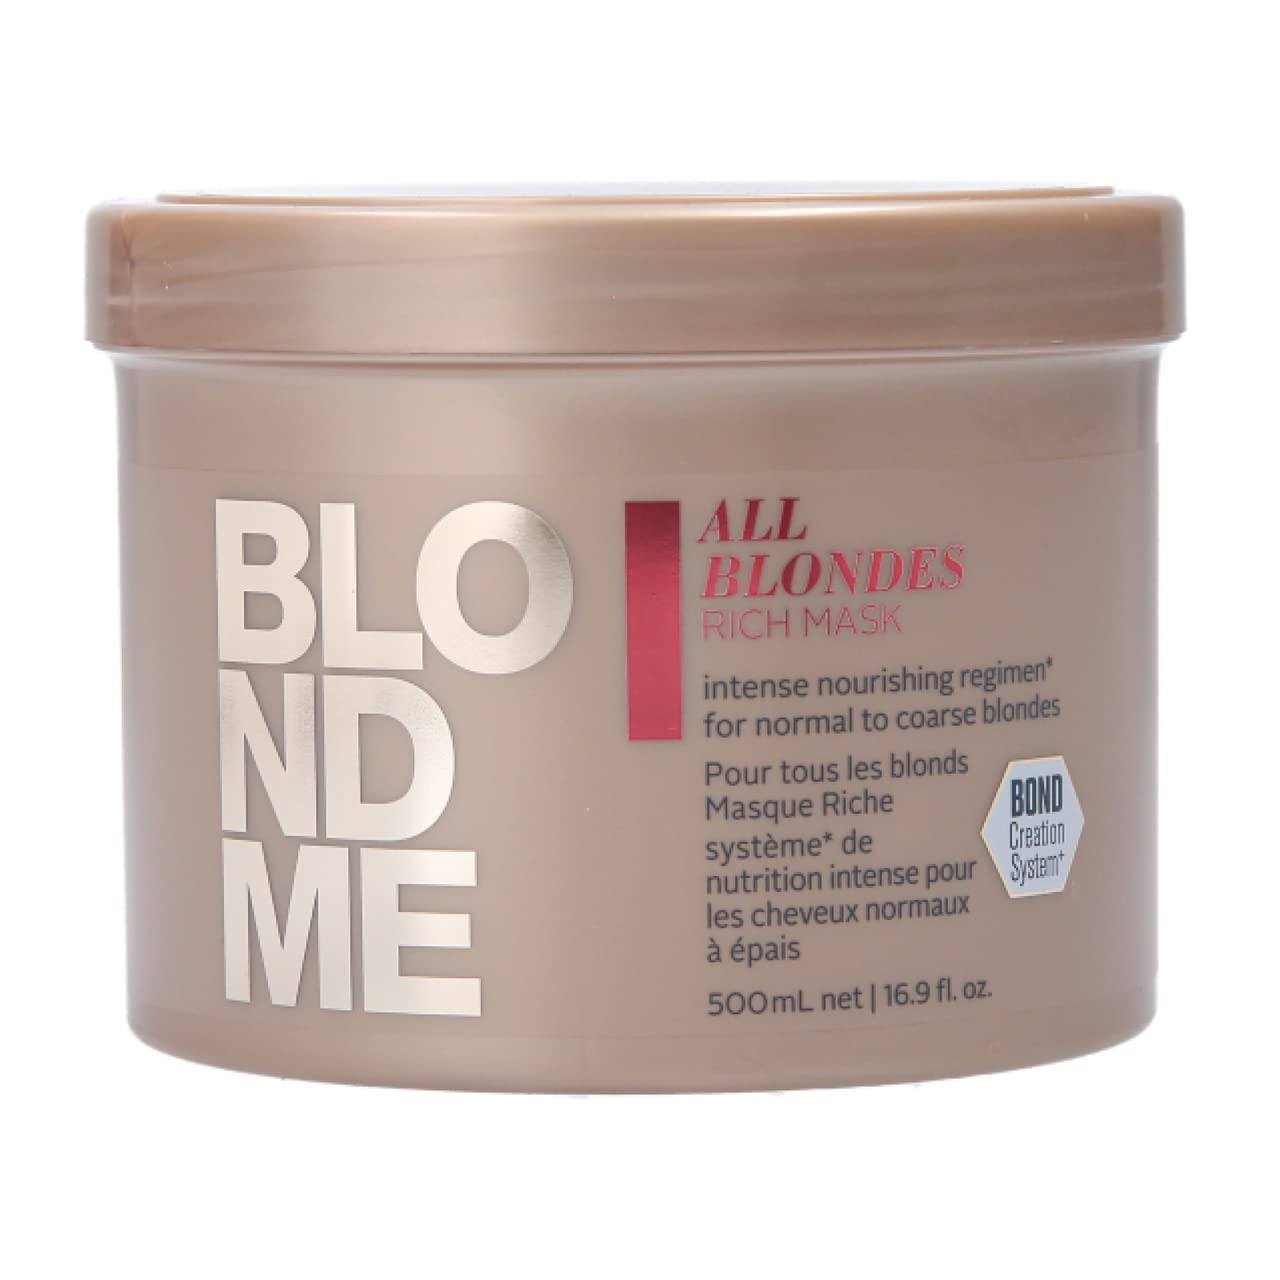 BlondMe All Blondes Rich Mask – Deep Conditioning Bond Restoring Hair Treatment – Smoothing and Nourishing for Normal to